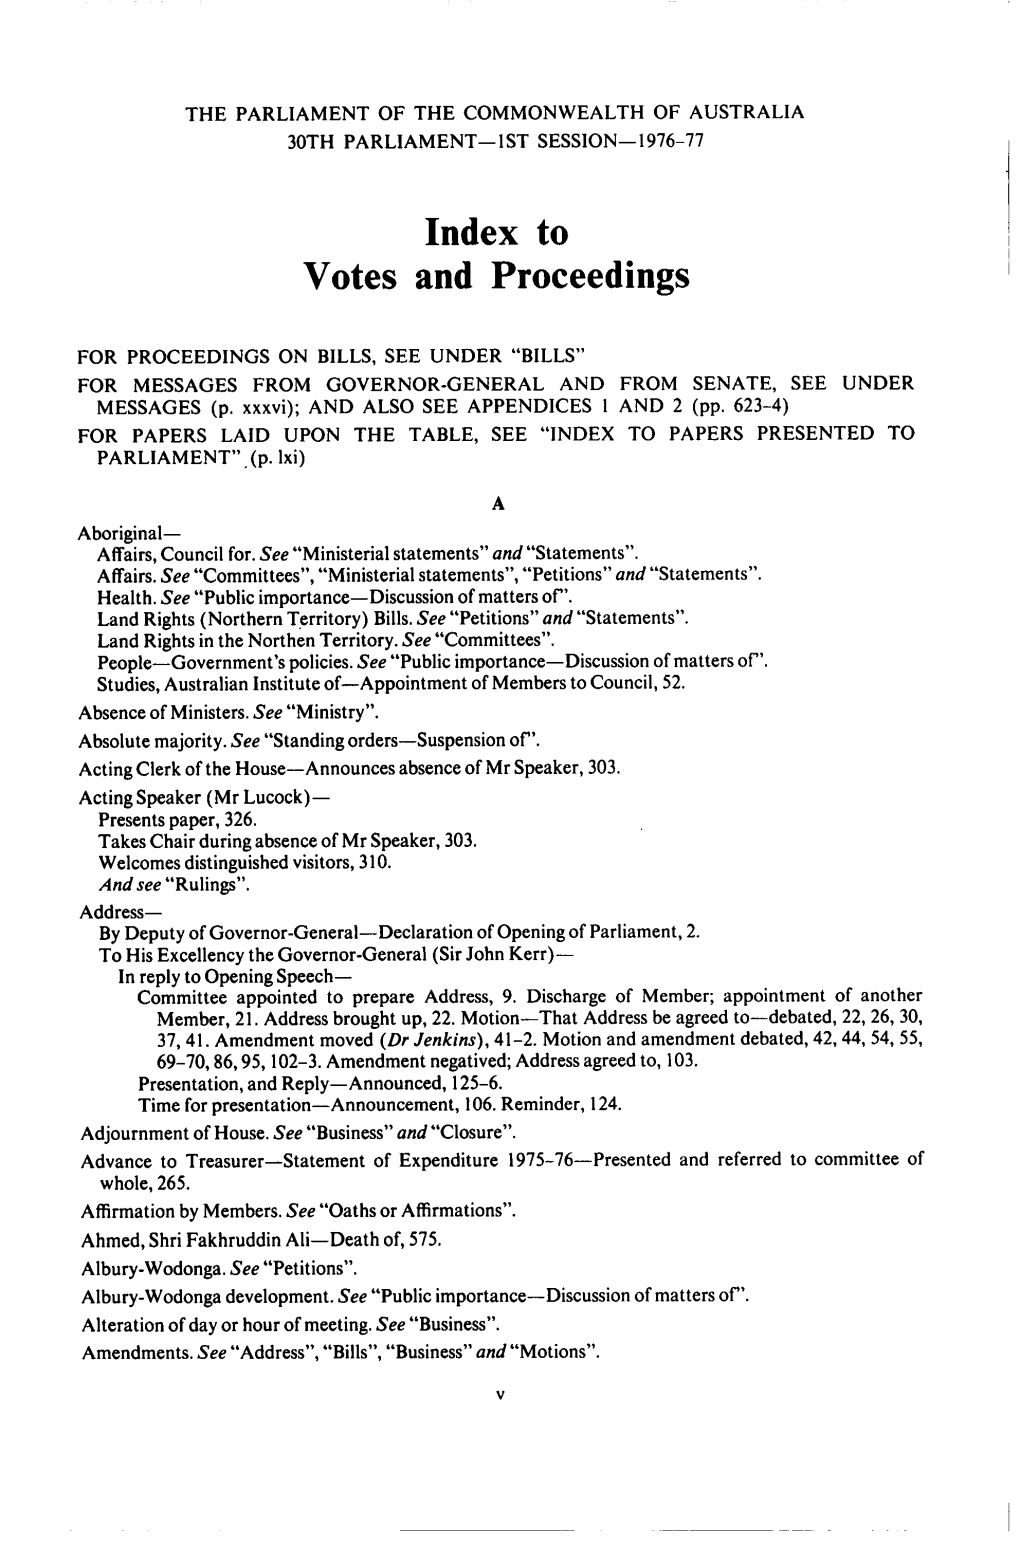 Index to Votes and Proceedings